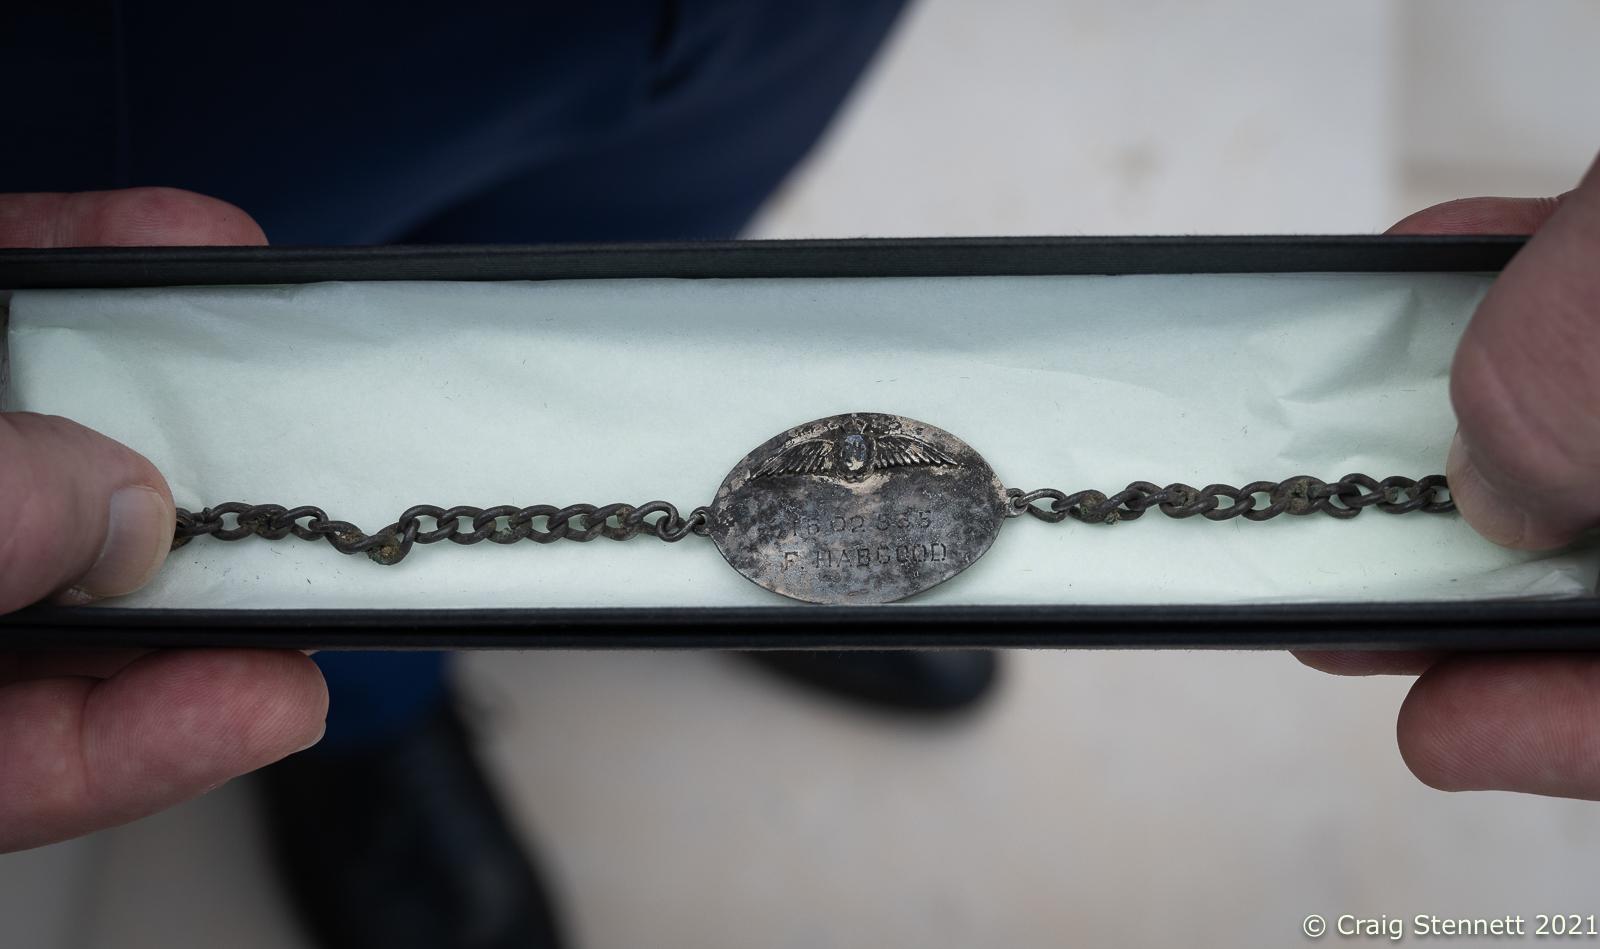 Deceased Airman's Engraved Bracelet Found 70 years on at Concentration Camp